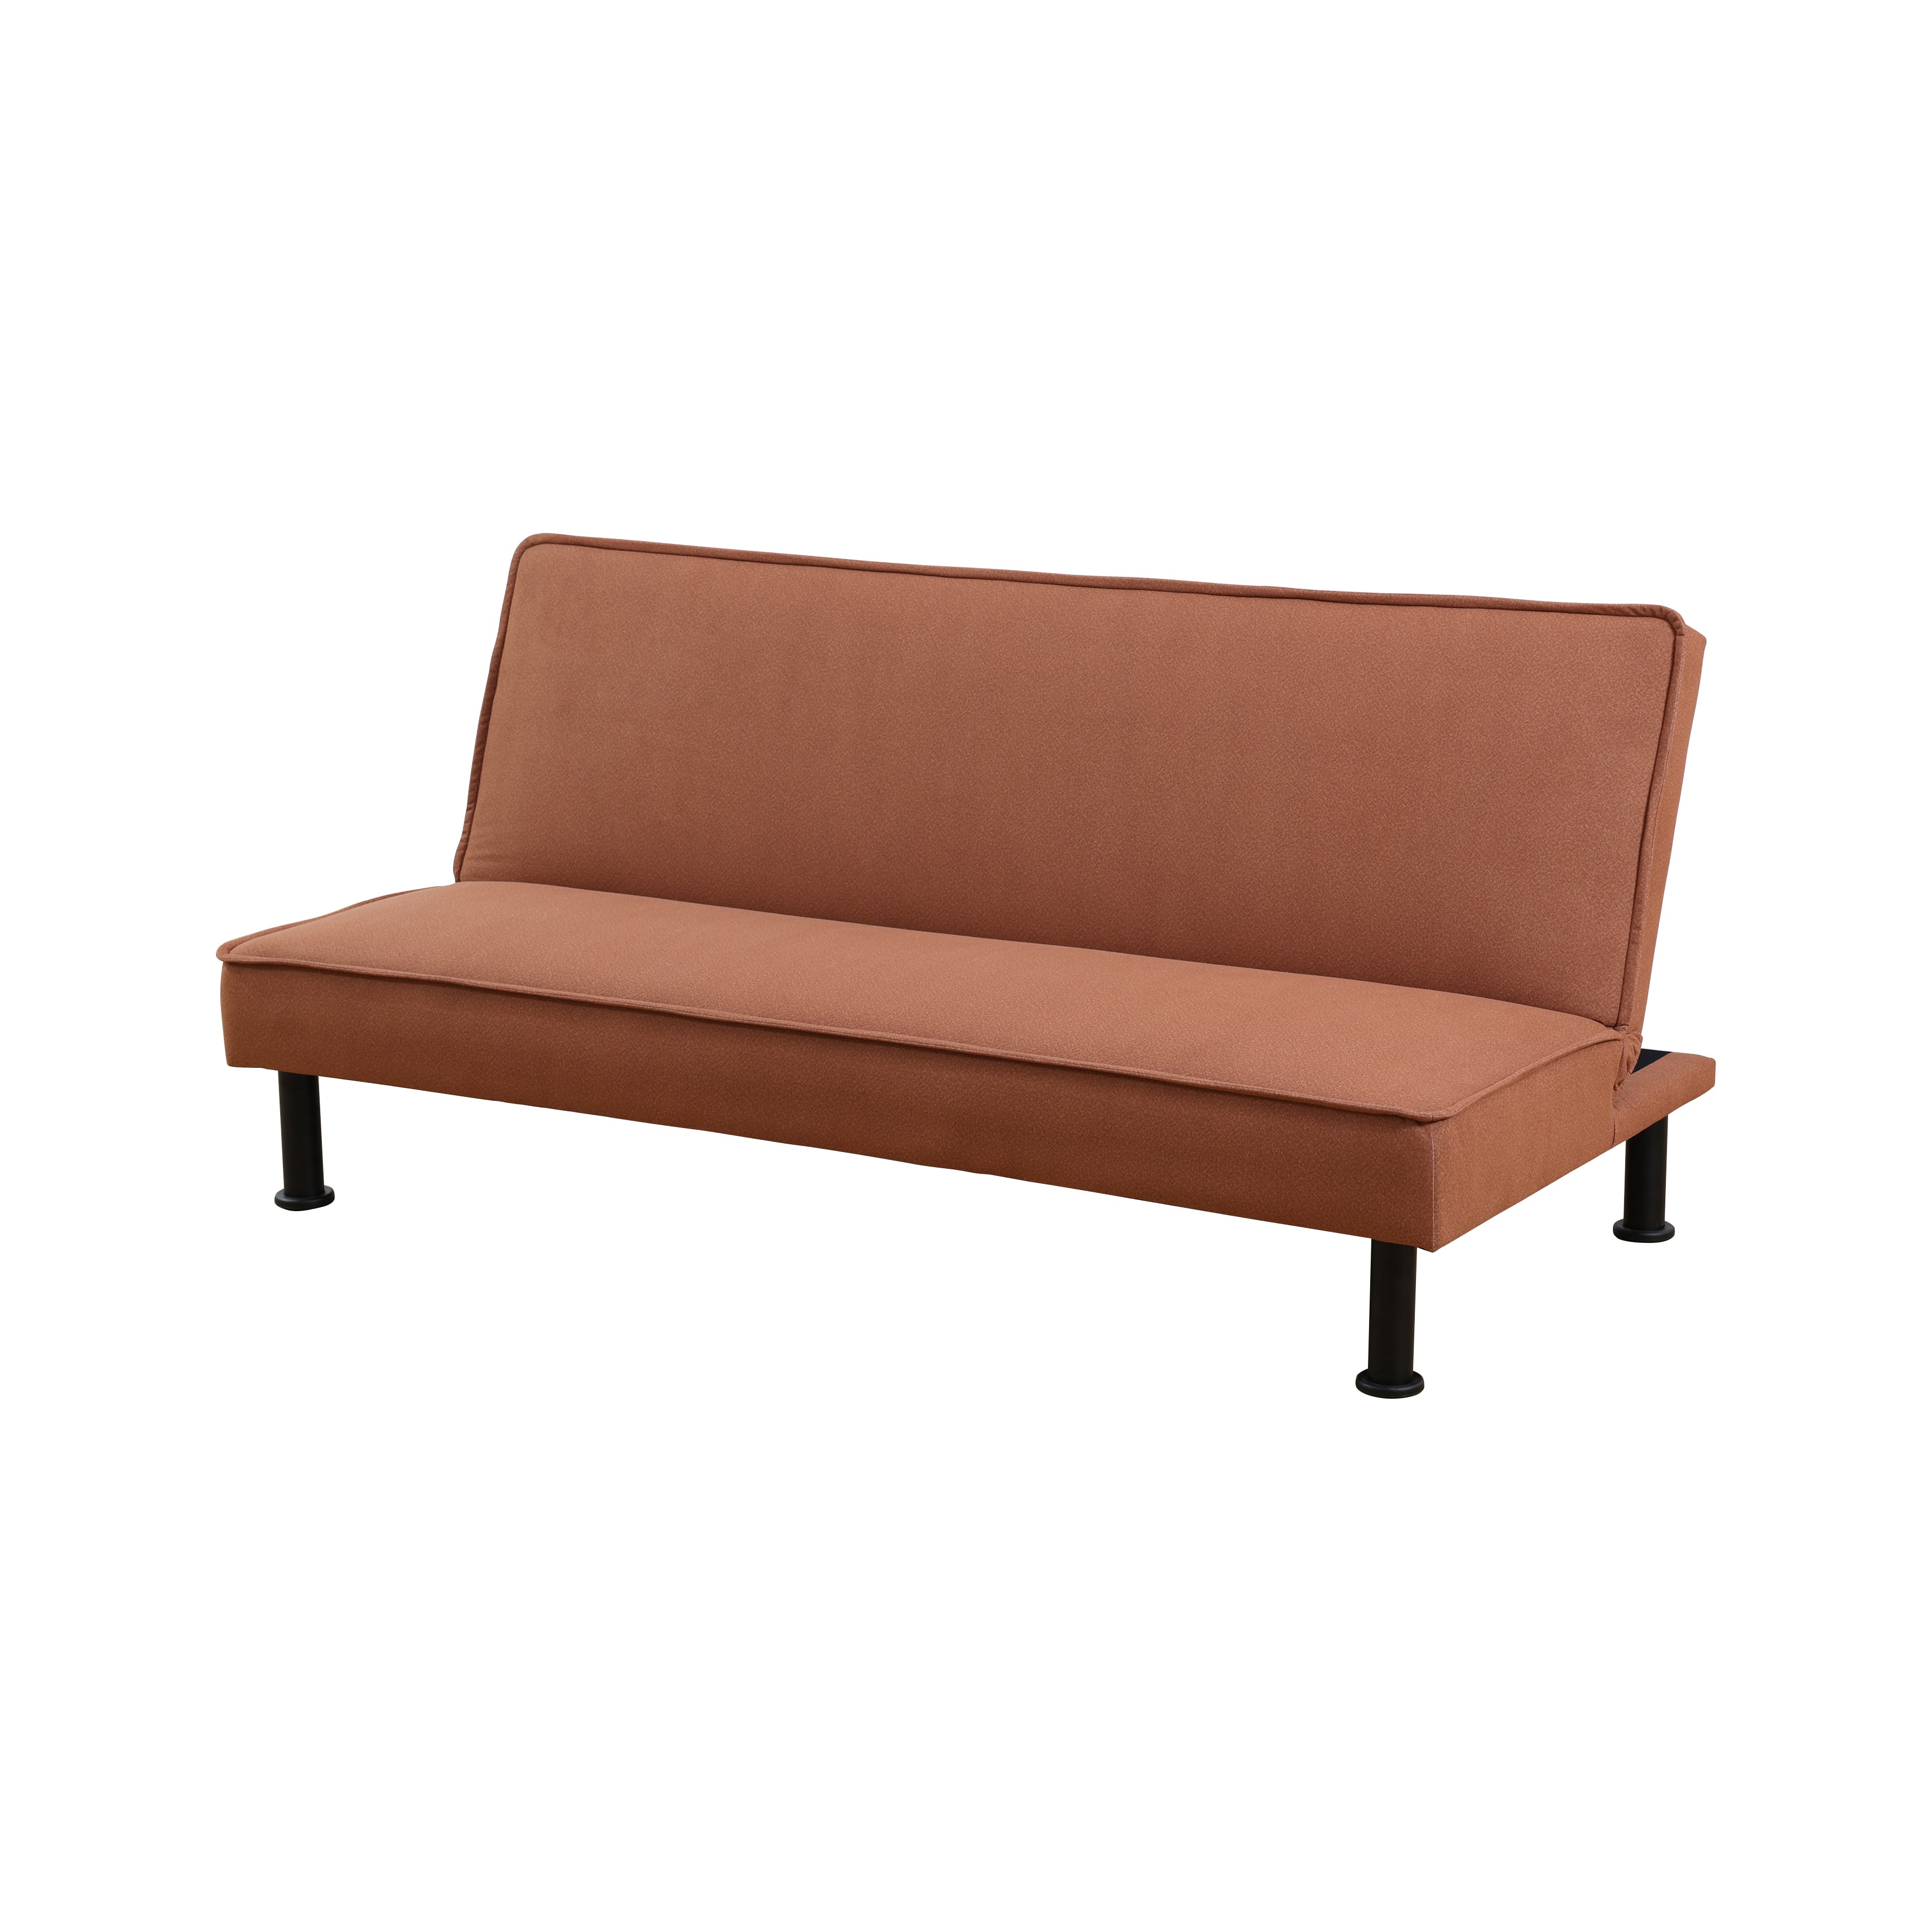 Ainehome Light Brown Flannel Sofa bed